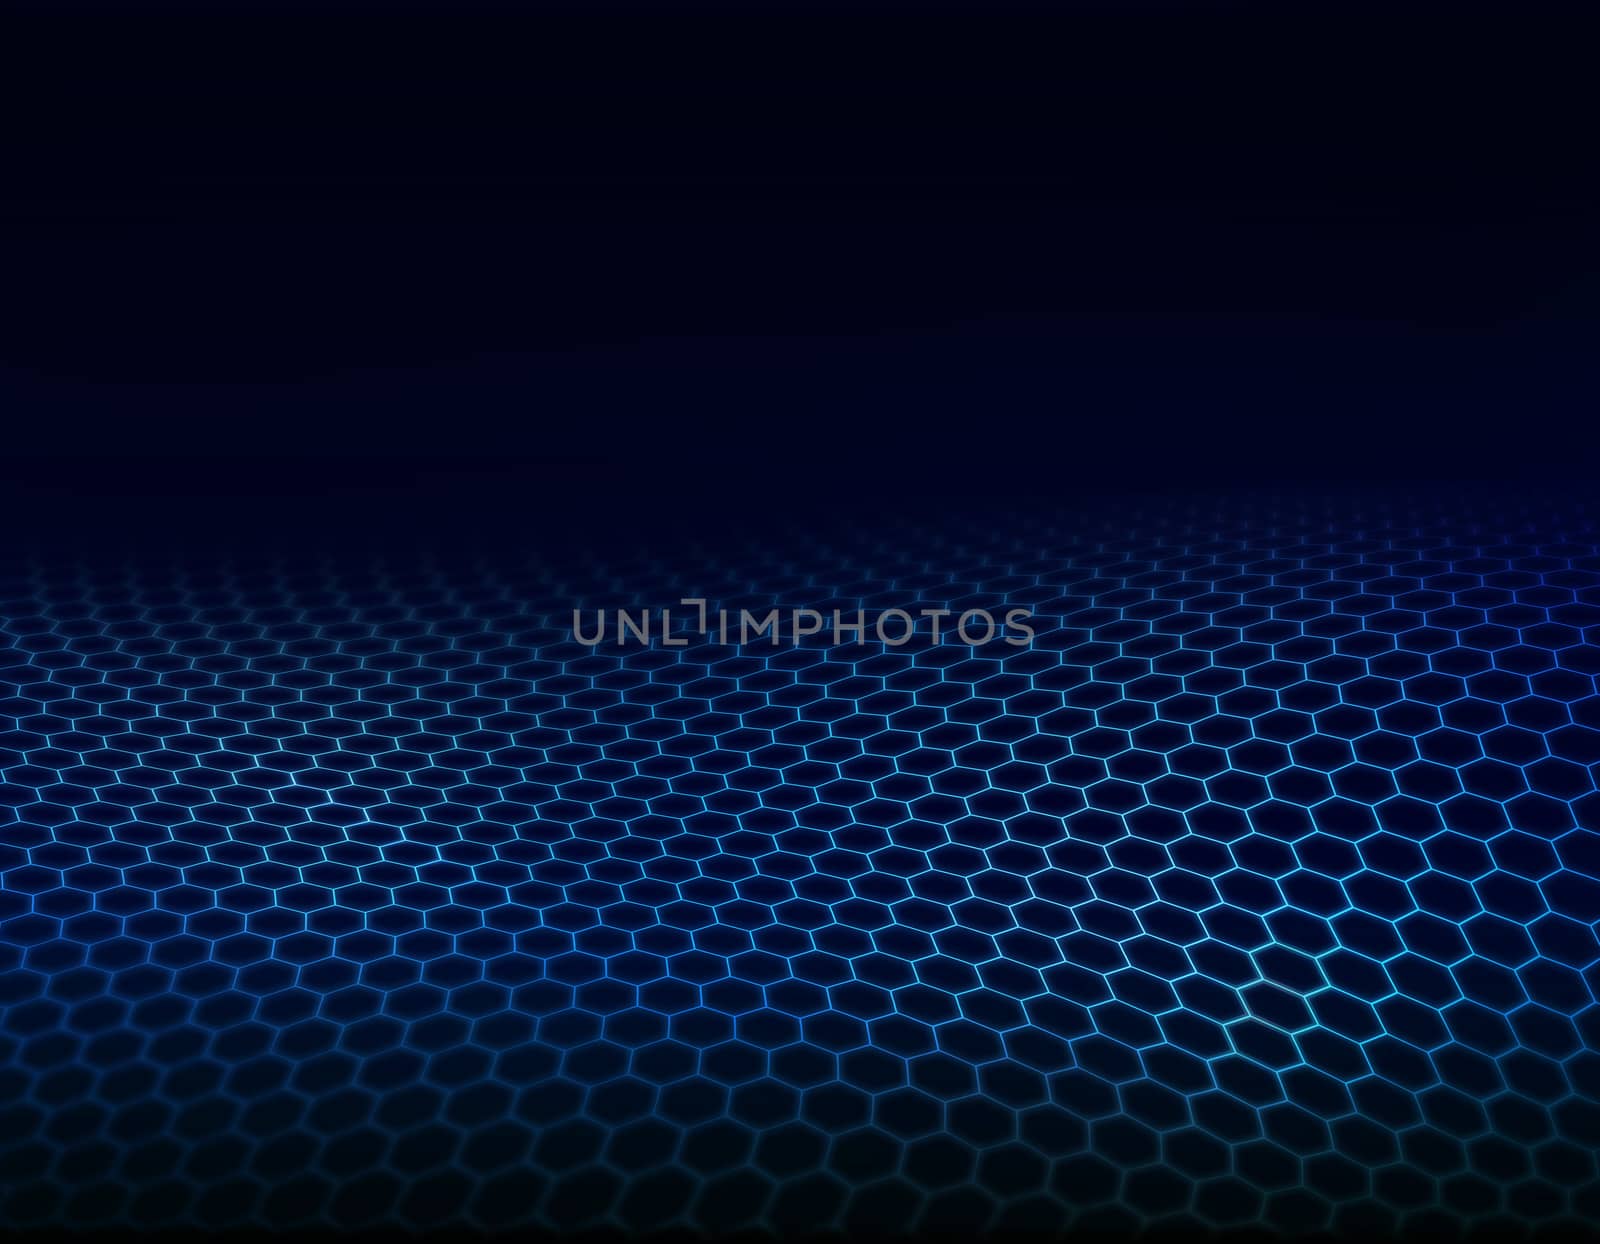 Abstract background with blue grids. by GraffiTimi